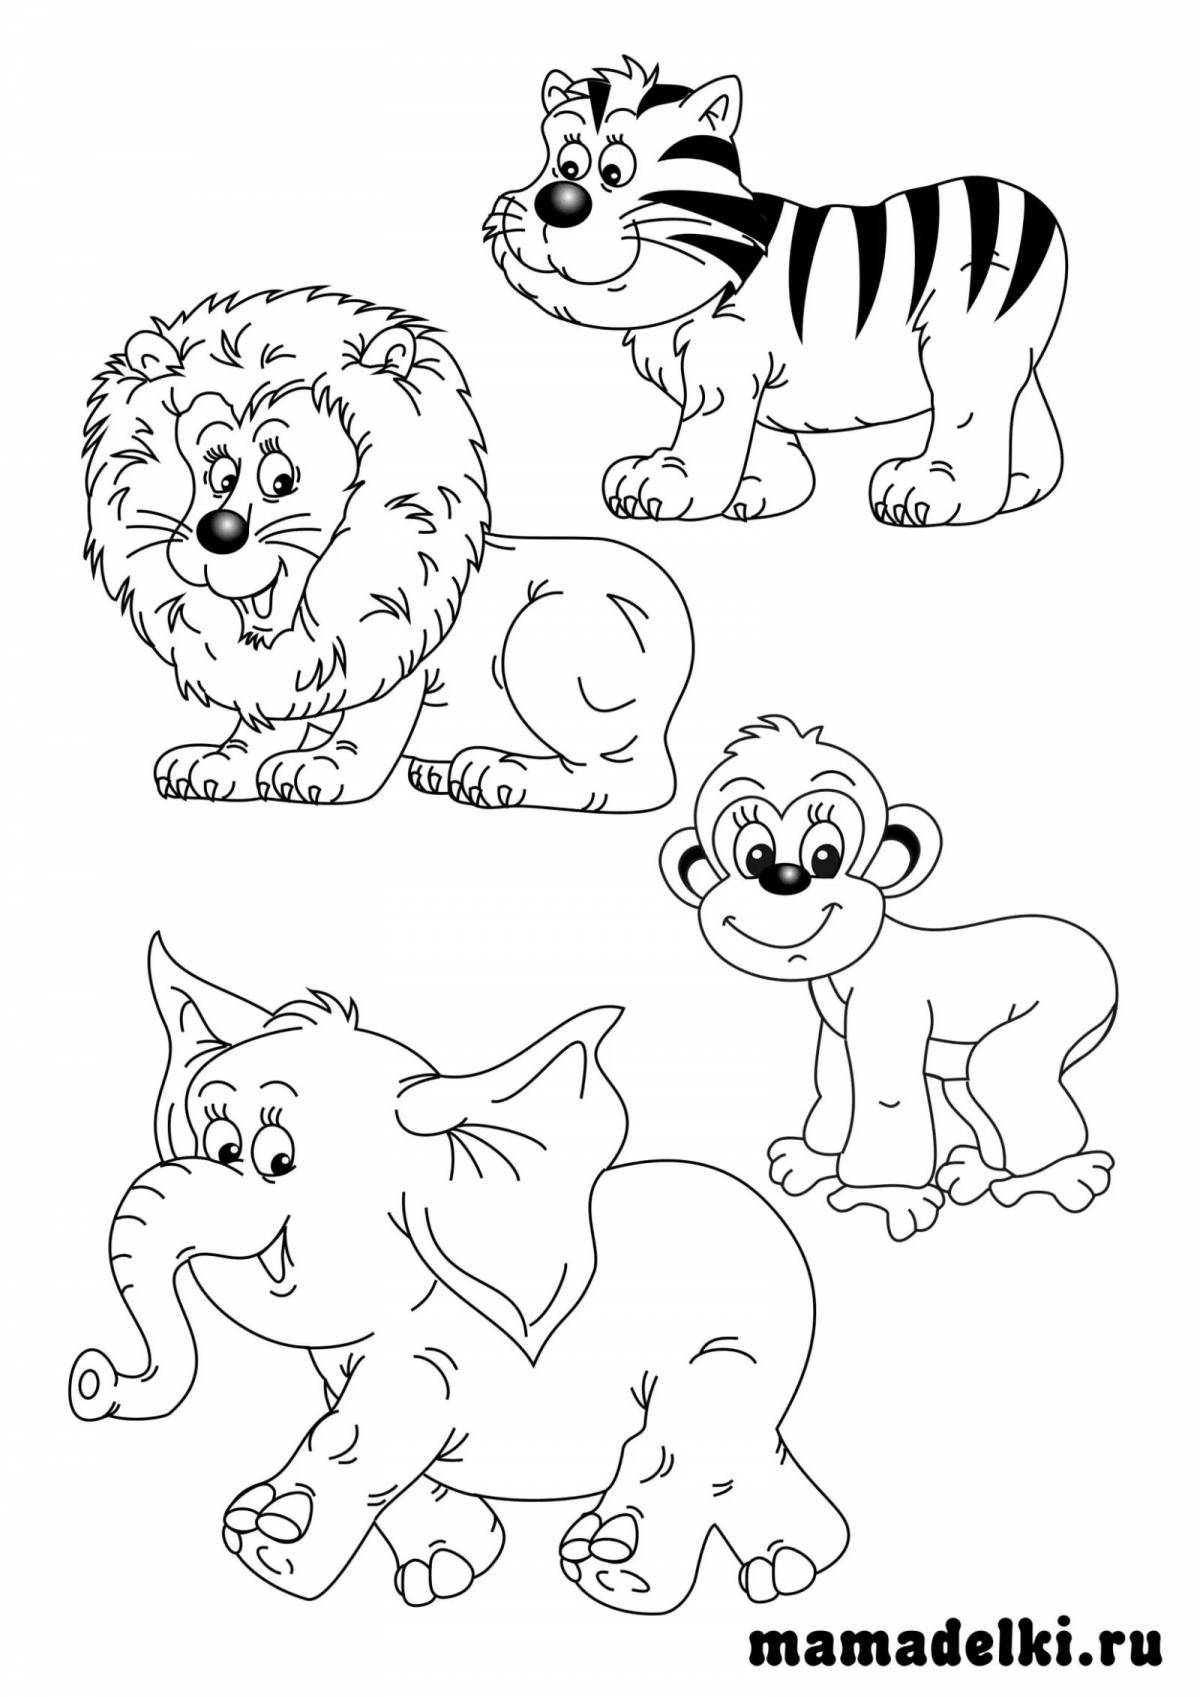 Playful wild animal coloring page for 2-3 year olds